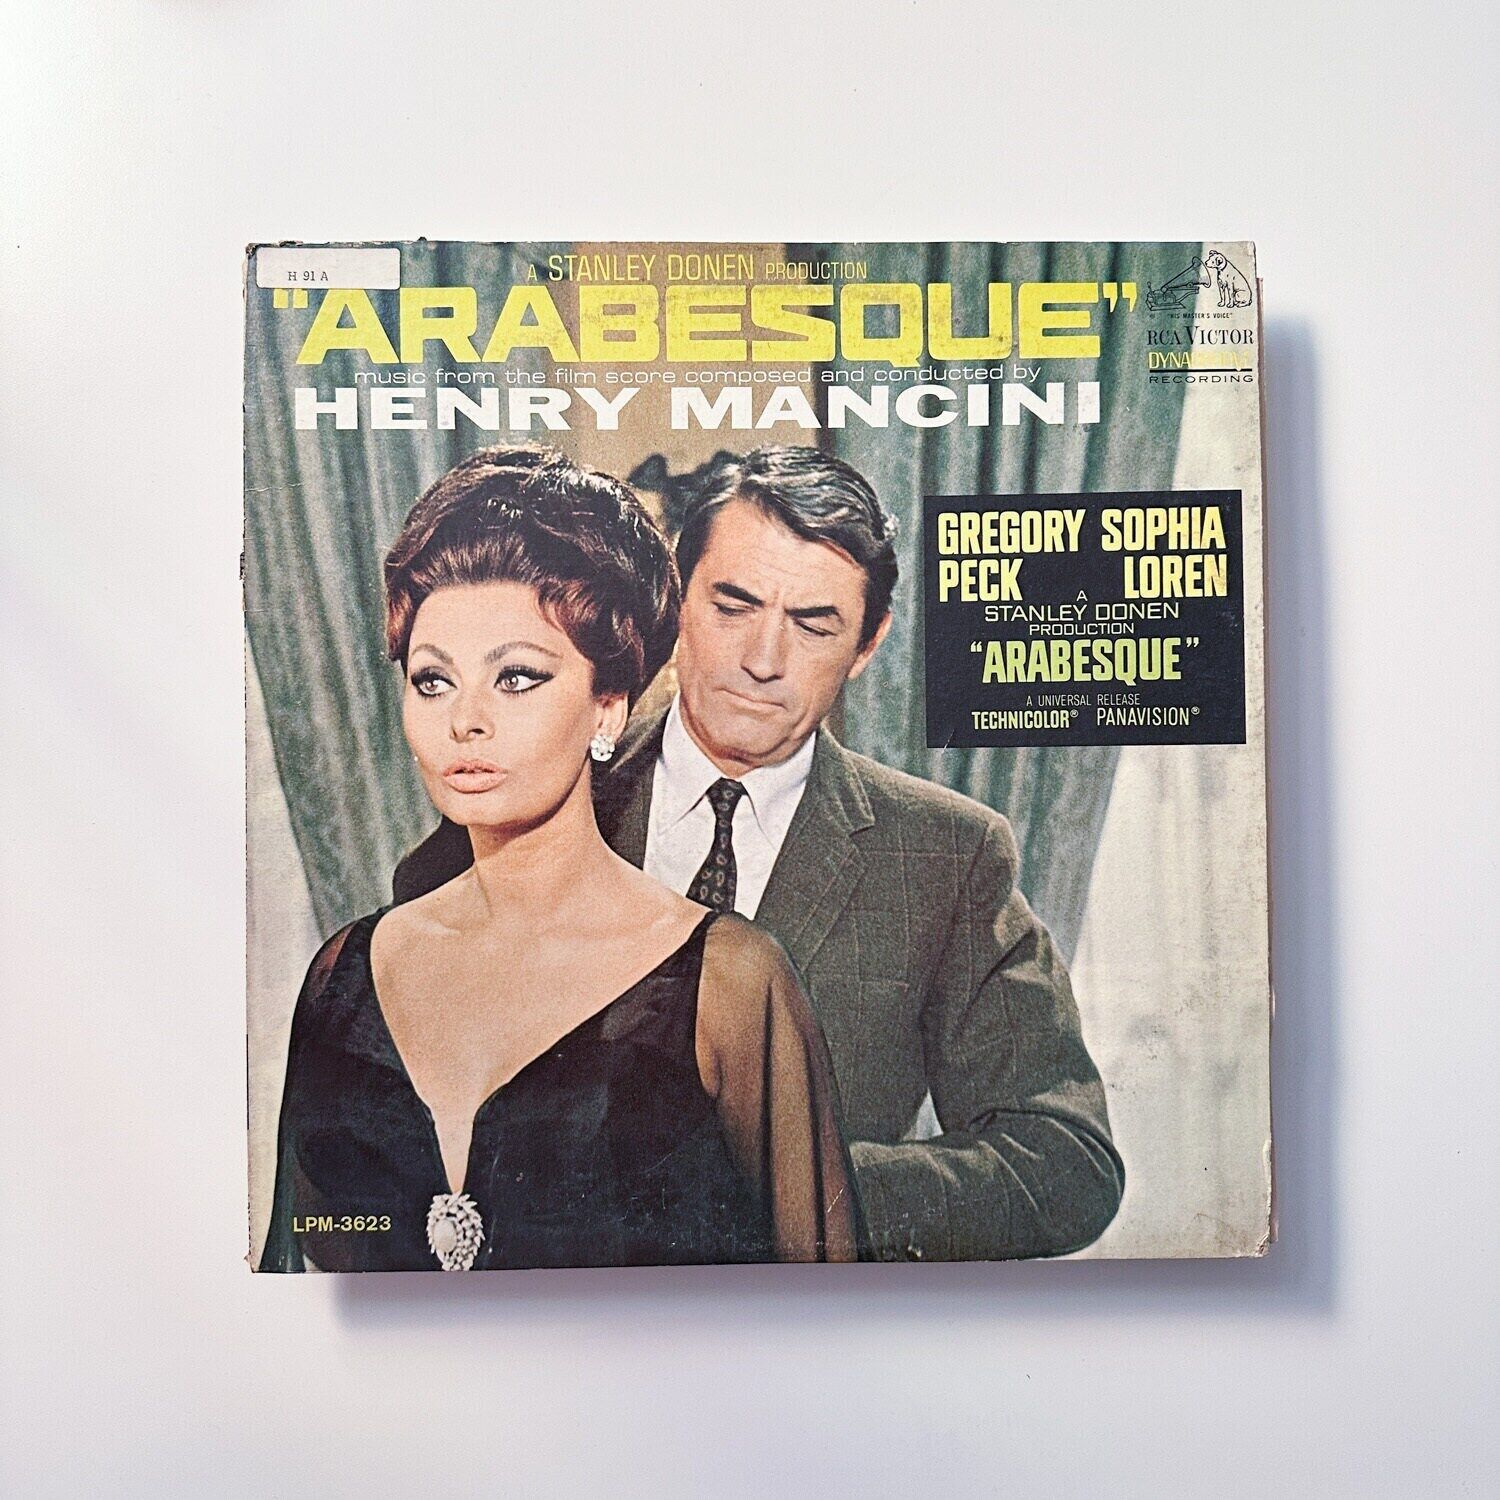 Henry Mancini - Arabesque (Music From The Motion Picture Score) - Vinyl LP Reco